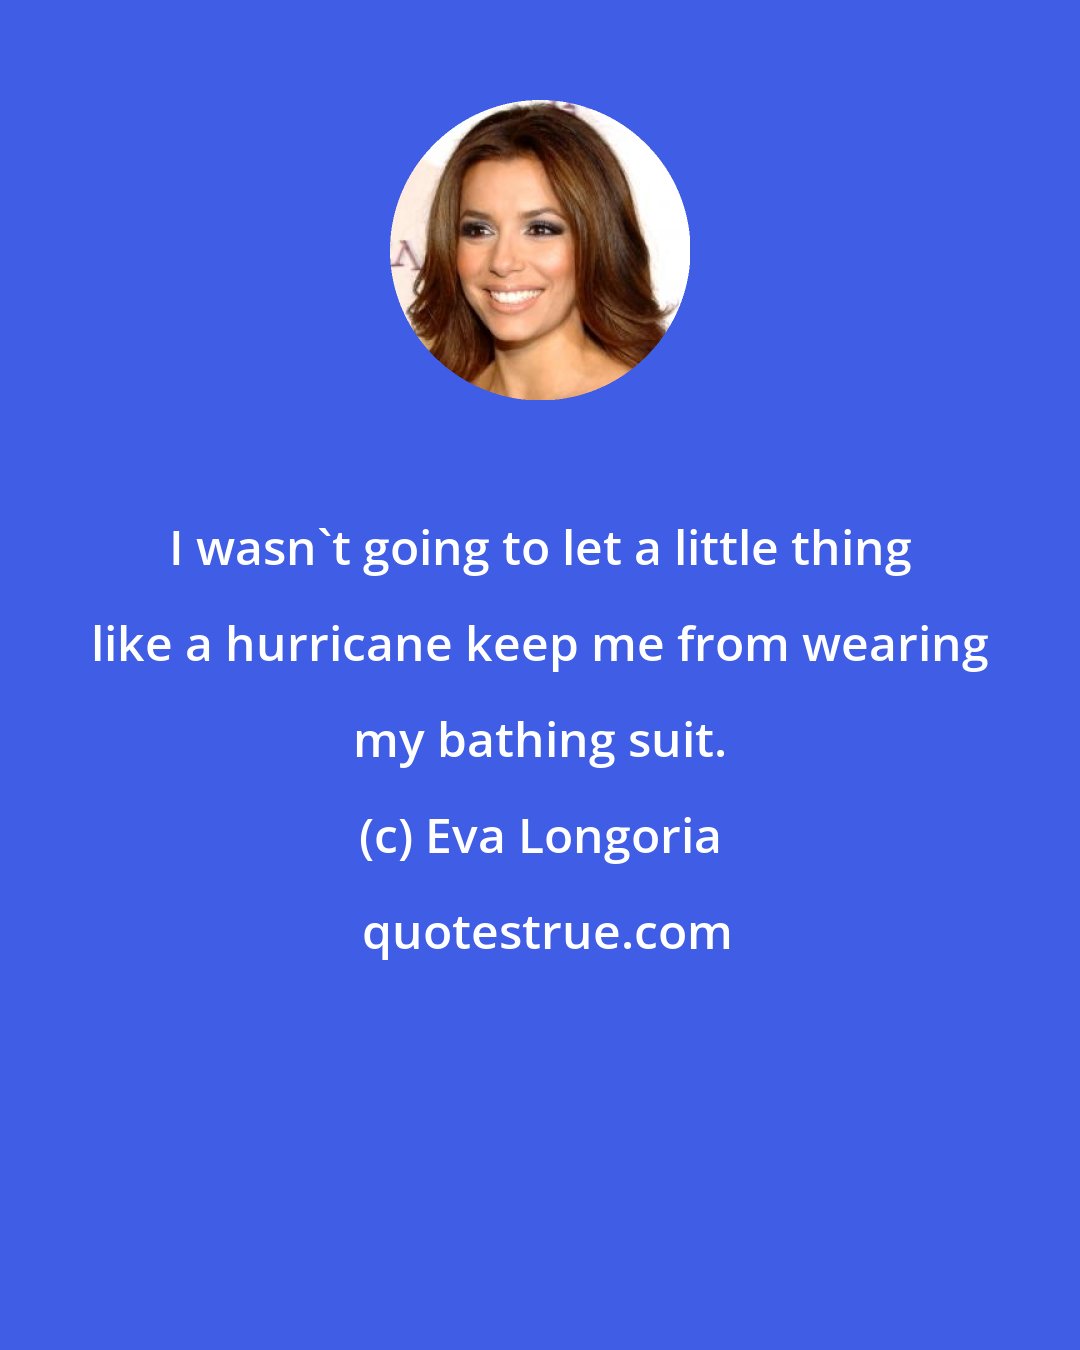 Eva Longoria: I wasn't going to let a little thing like a hurricane keep me from wearing my bathing suit.